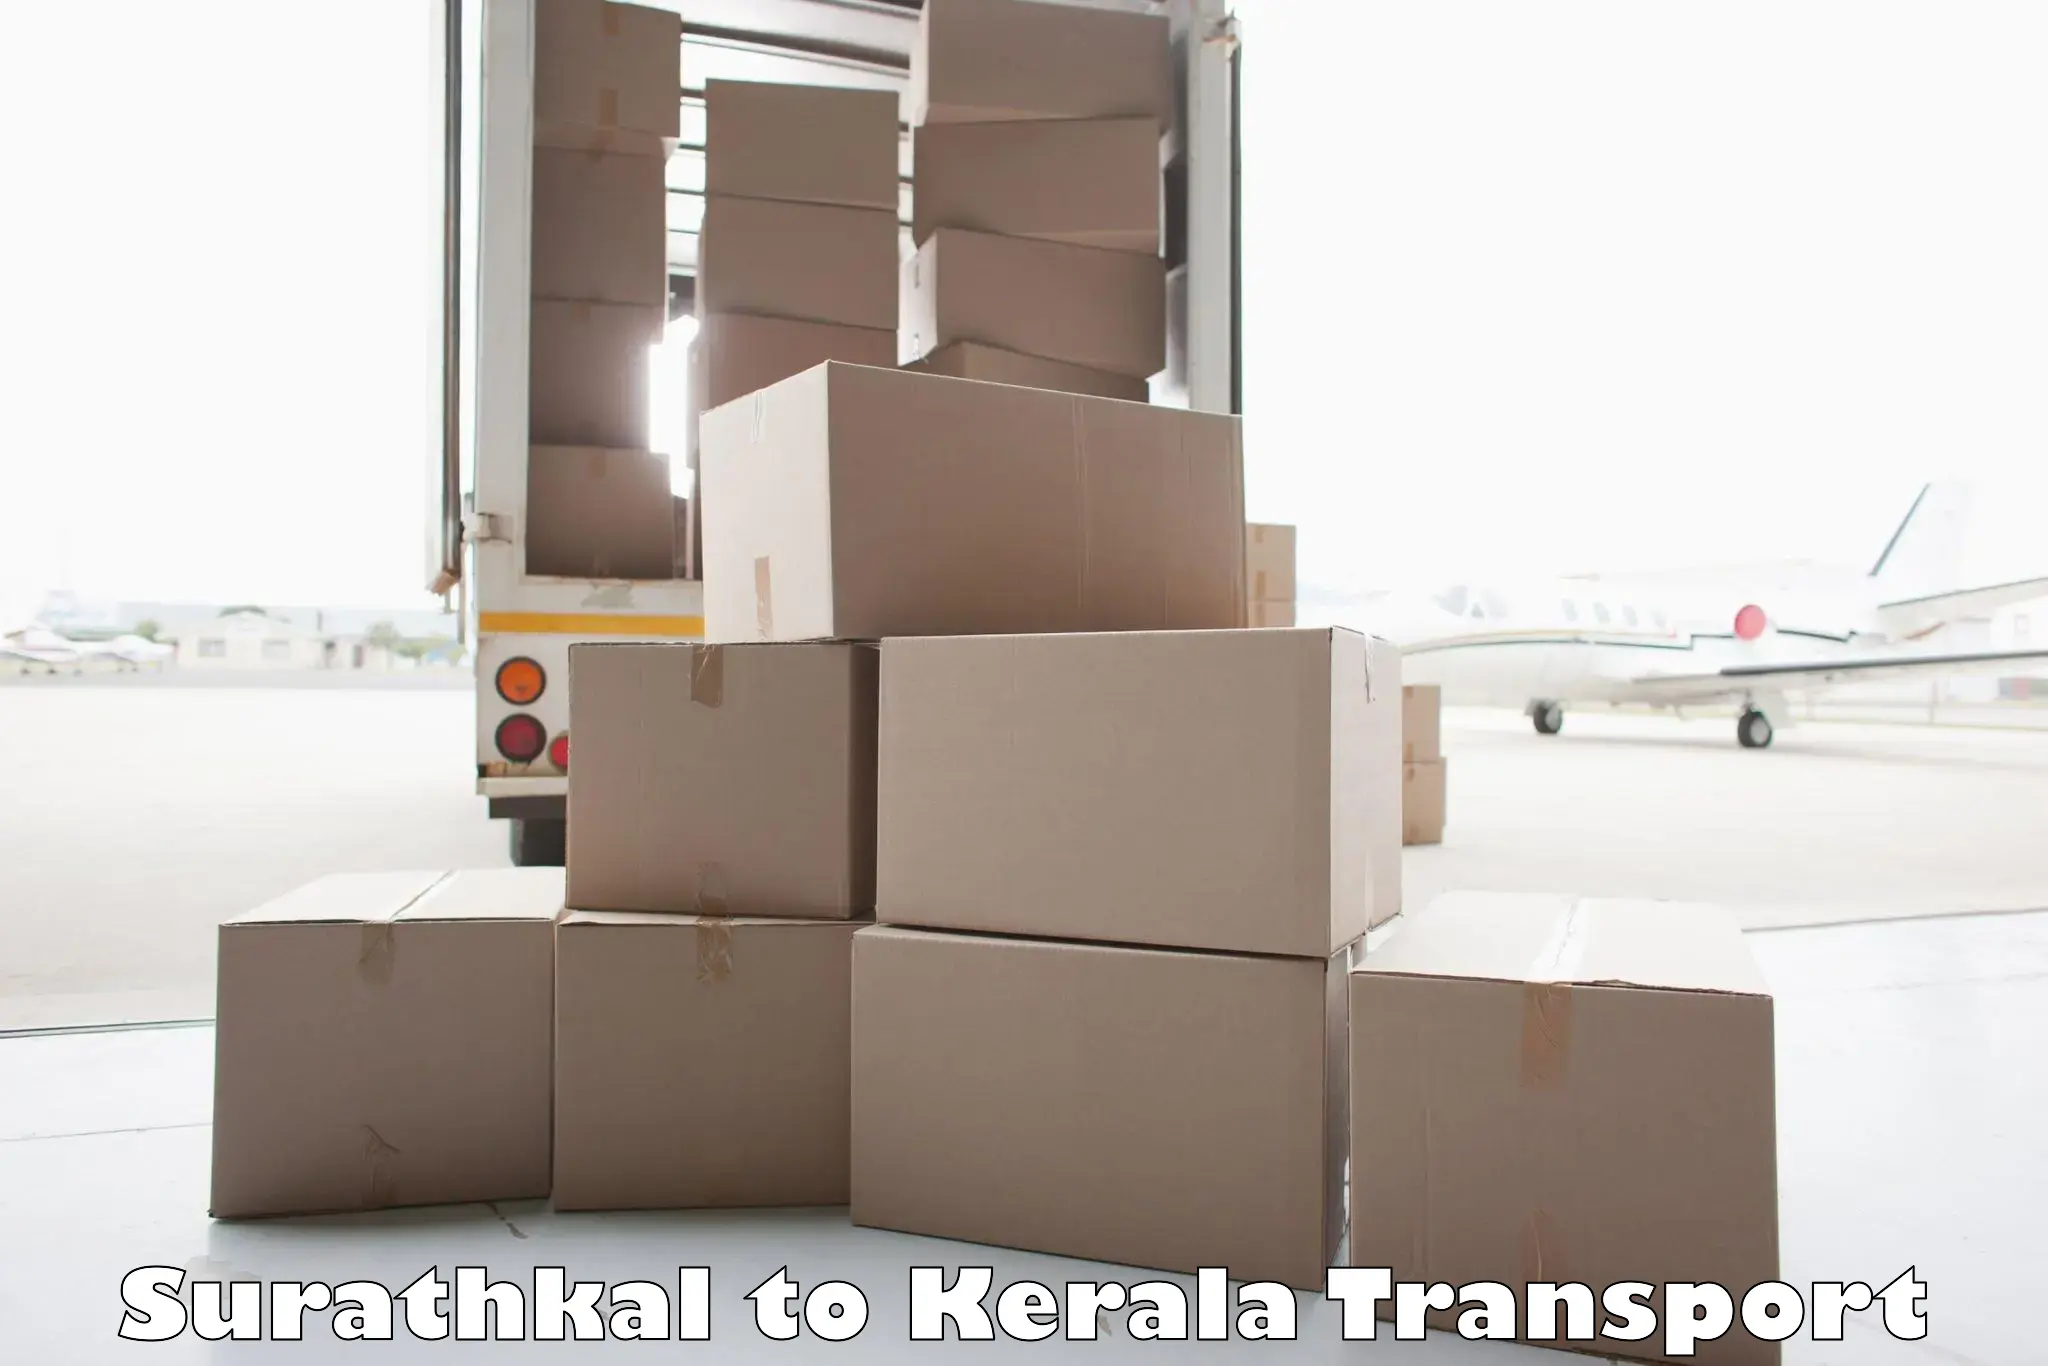 Air freight transport services Surathkal to Tirur